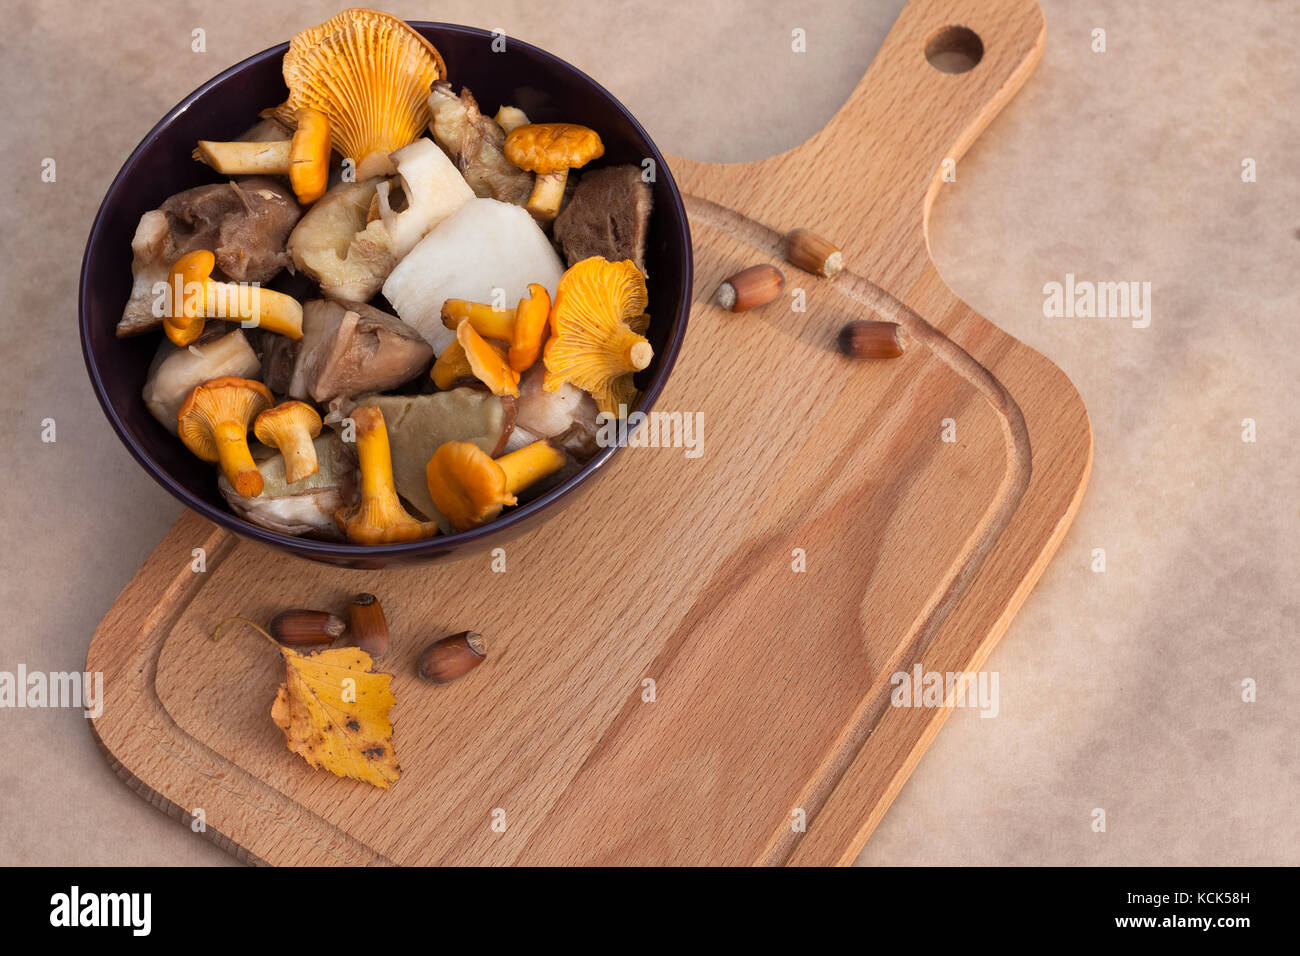 Raw Food. Bowl With Raw Cut Edible Mushrooms (Chanterelle, Cep) And Cutting Wooden Board On Beige Brown Background Top View. Stock Photo